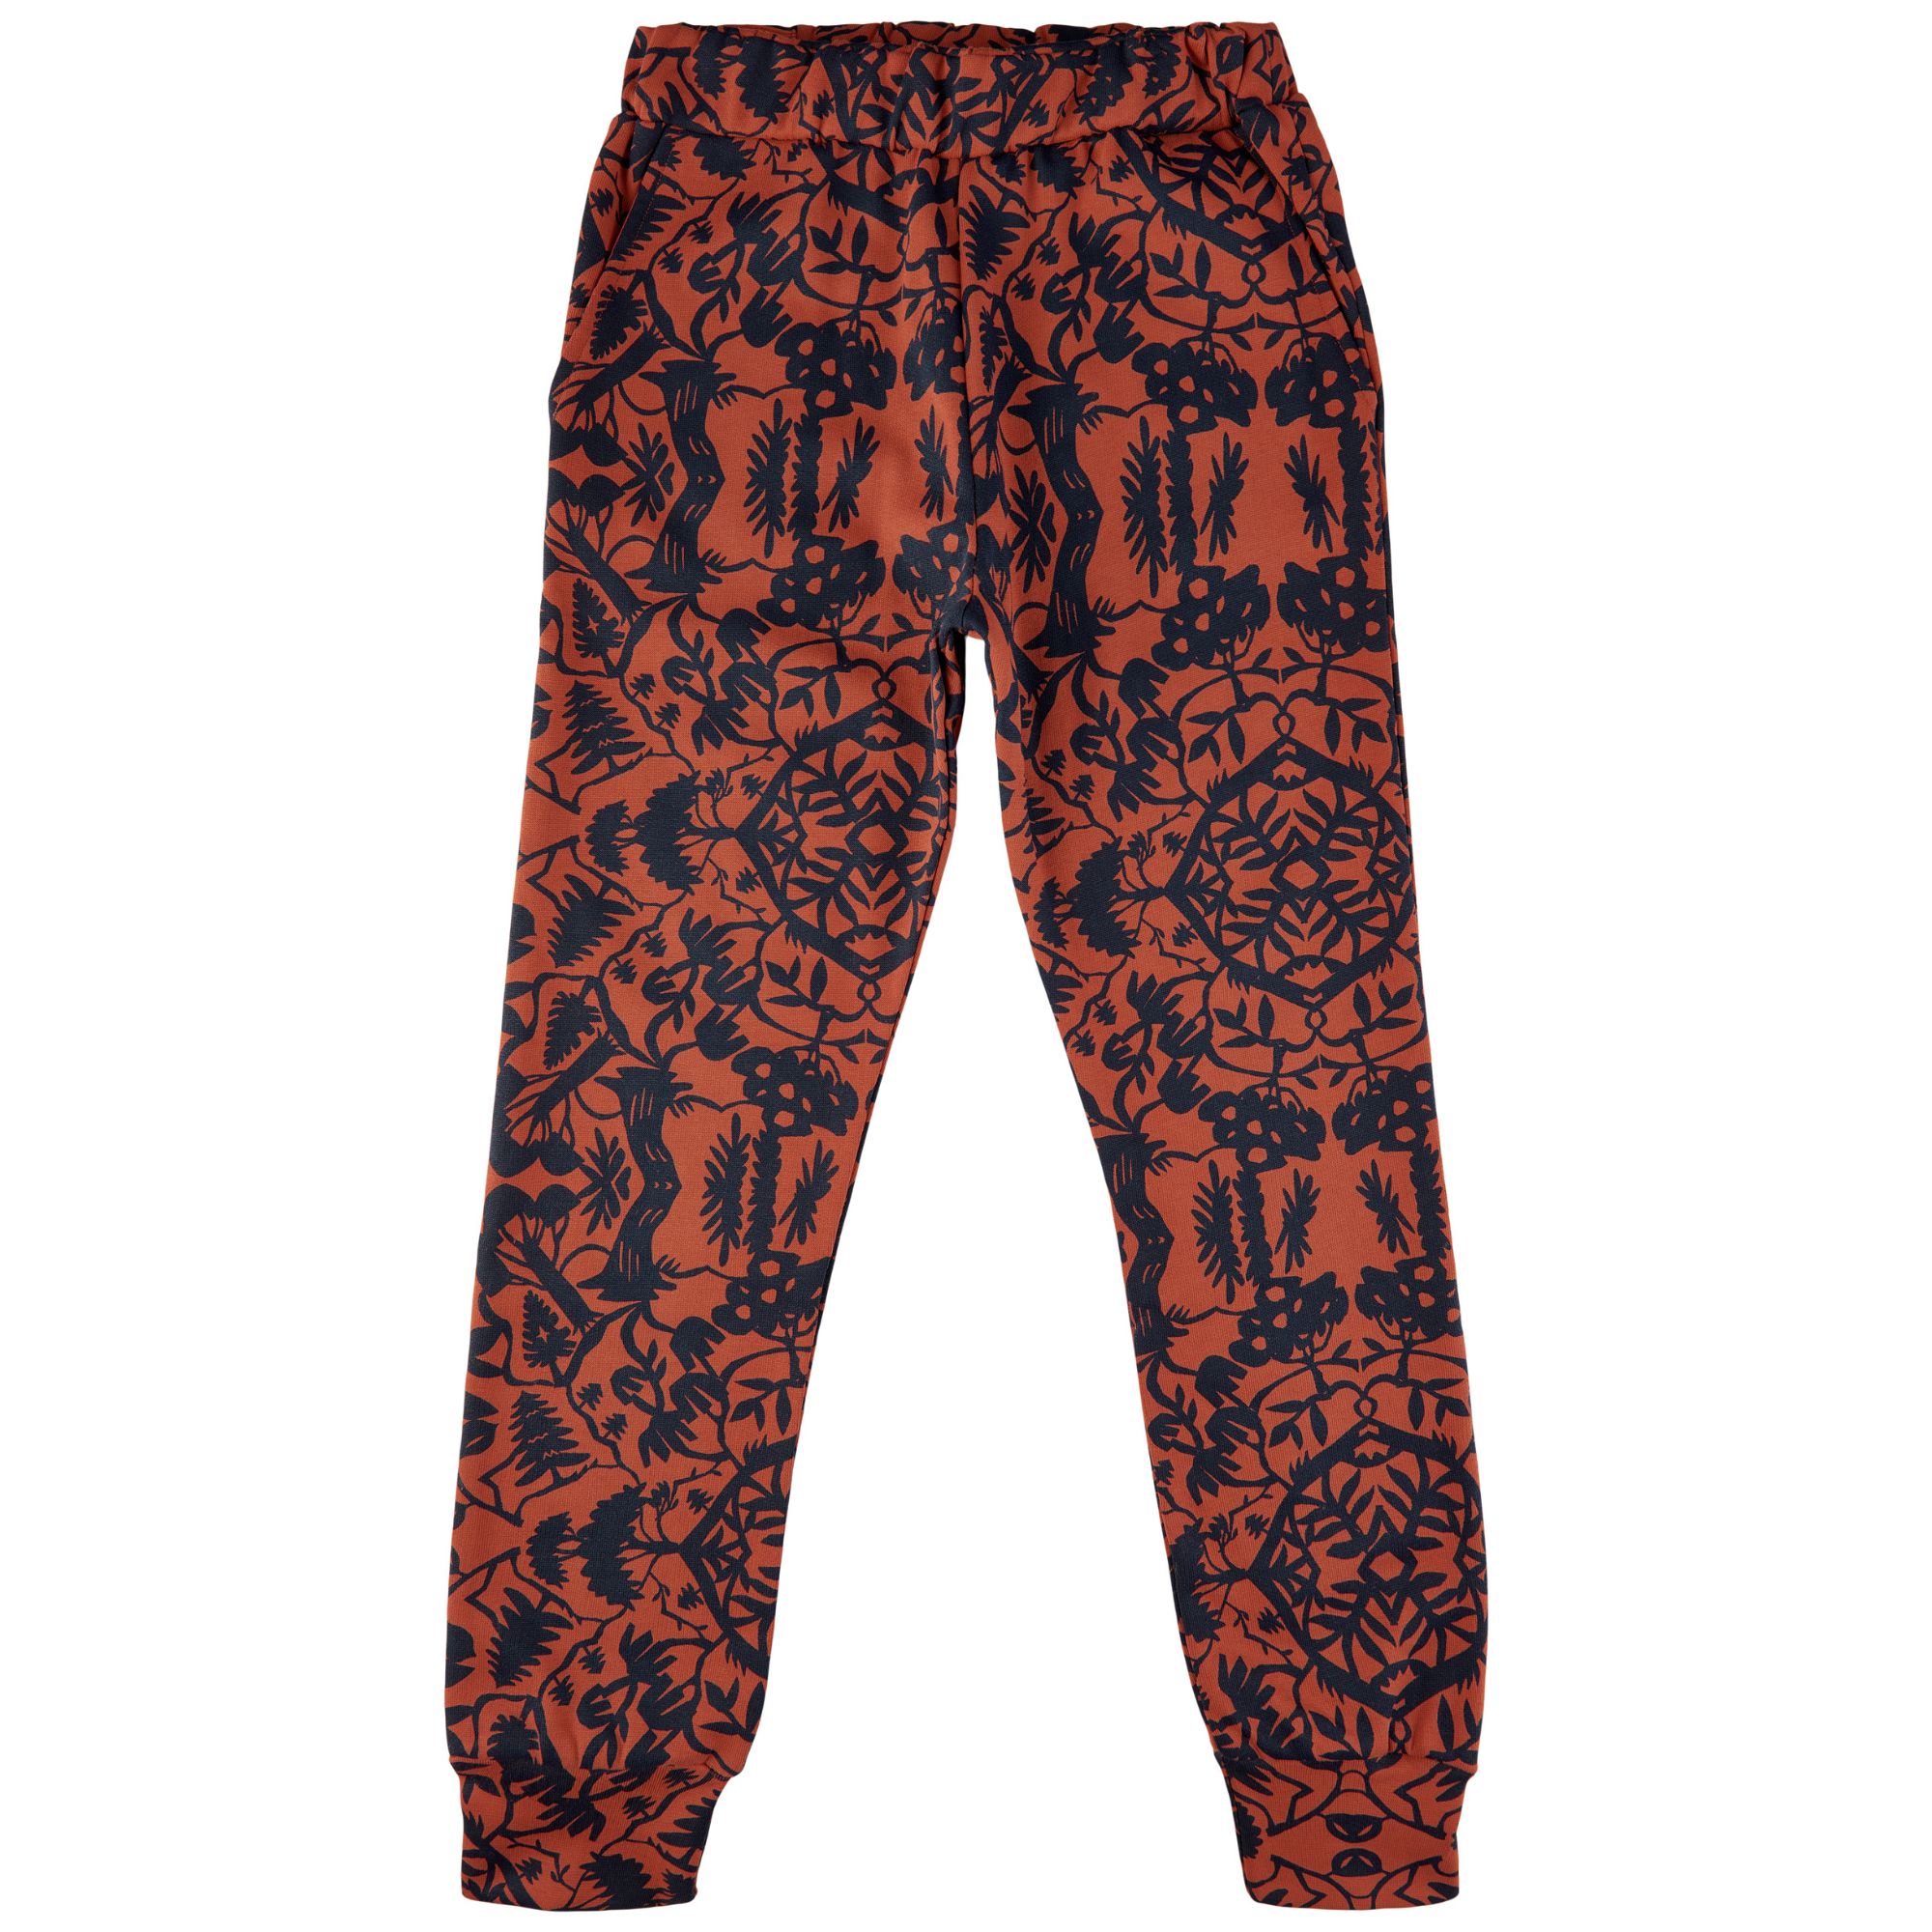 Soft Gallery - Jules Papertree Sweatpants, SG2390 - Baked Clay